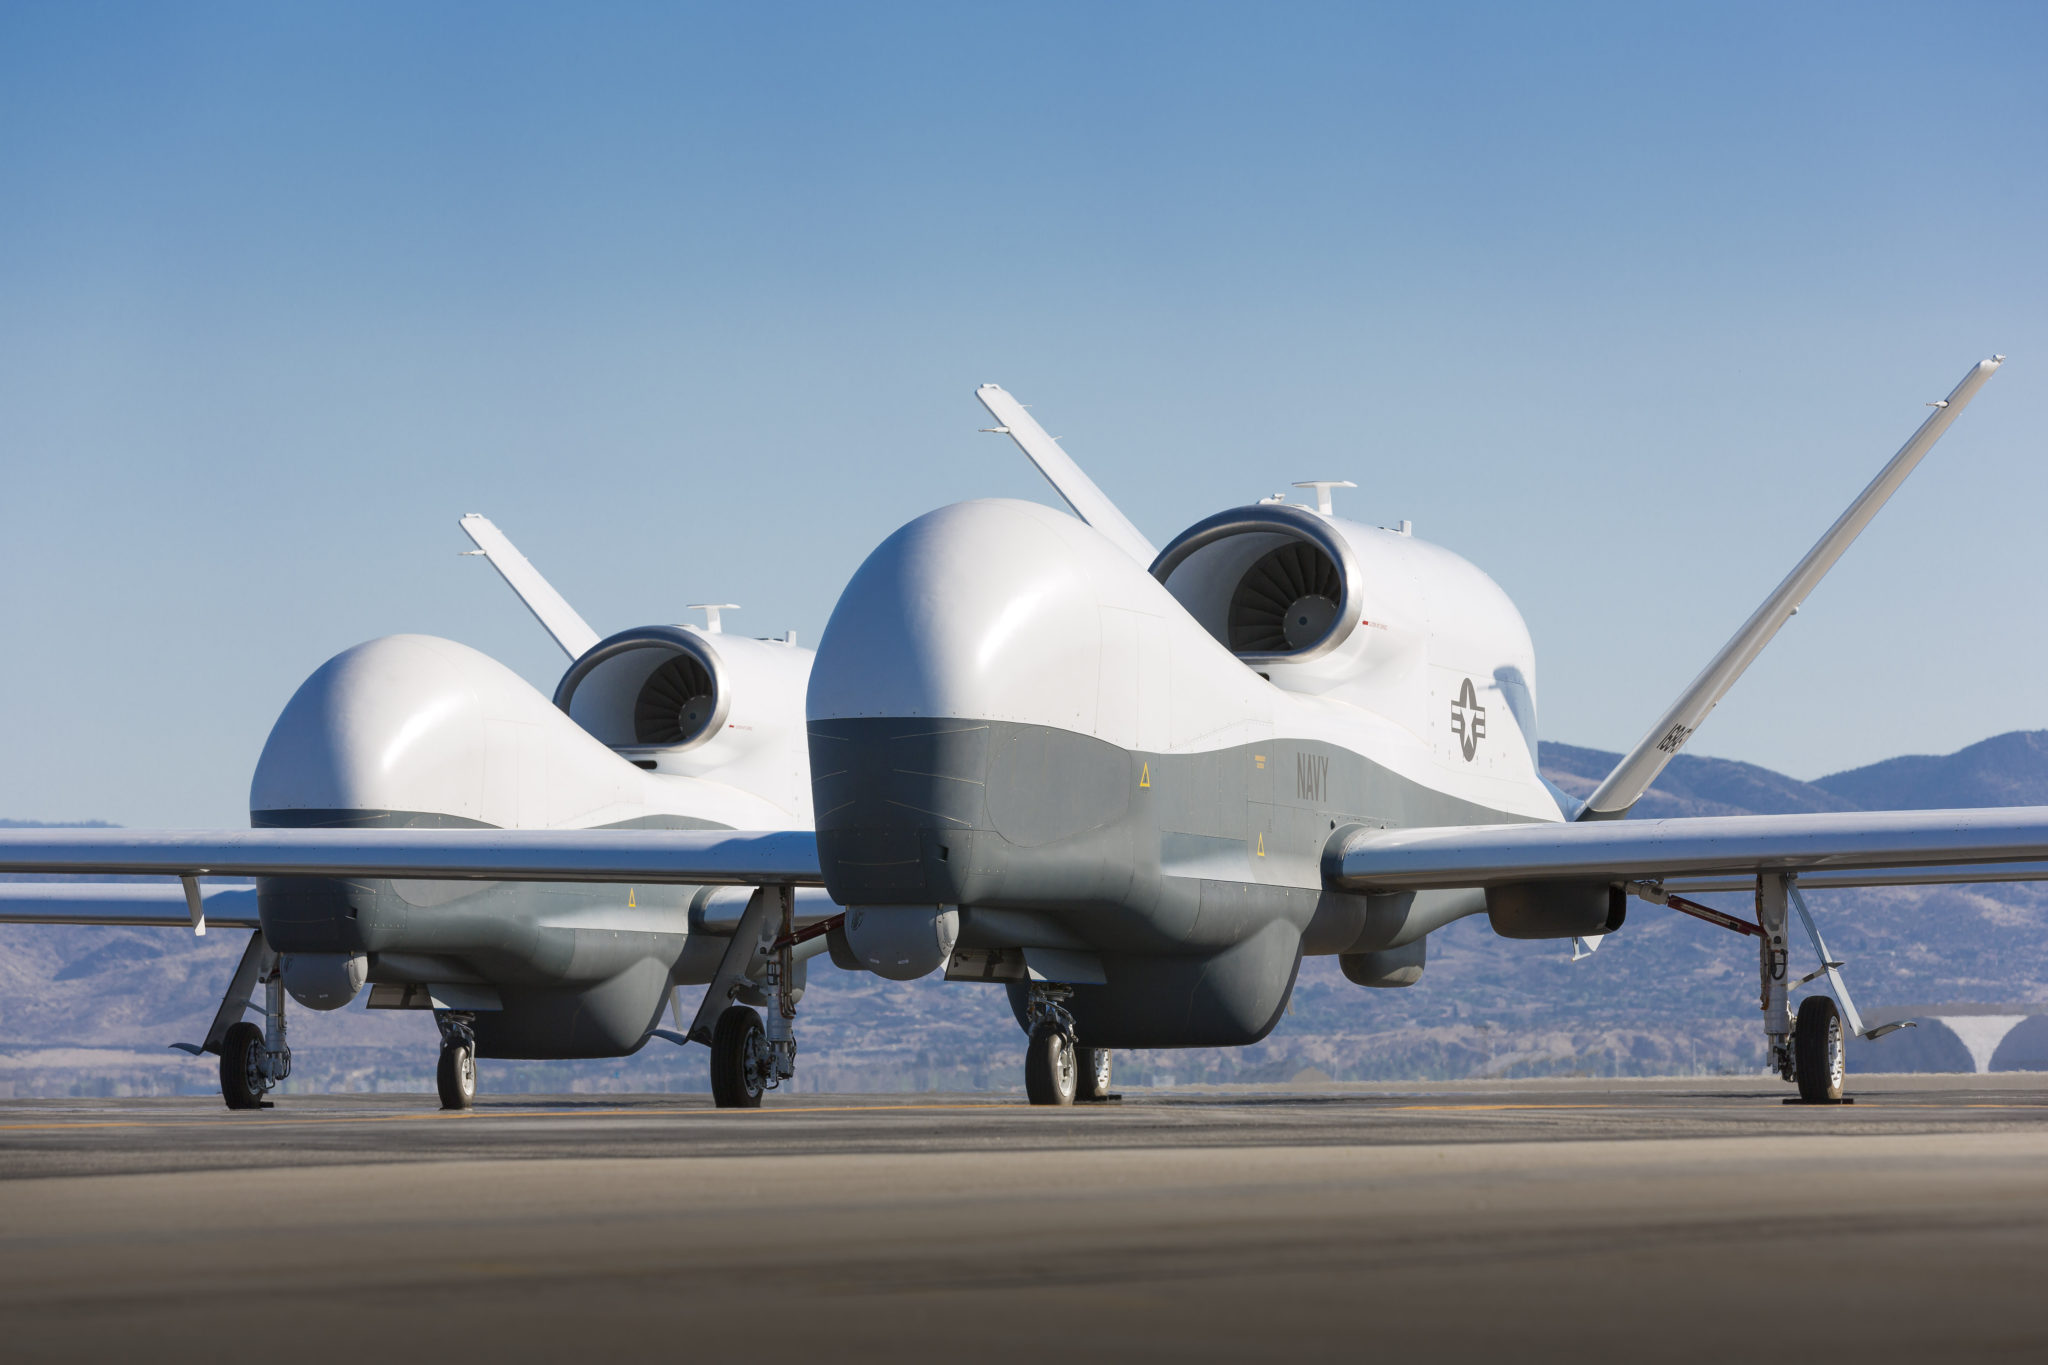 Two Northrop Grumman MQ-4C Triton unmanned aerial vehicles are seen on the tarmac at a Northrop Grumman test facility in Palmdale, Calif. Triton is undergoing flight testing as an unmanned maritime surveillance vehicle